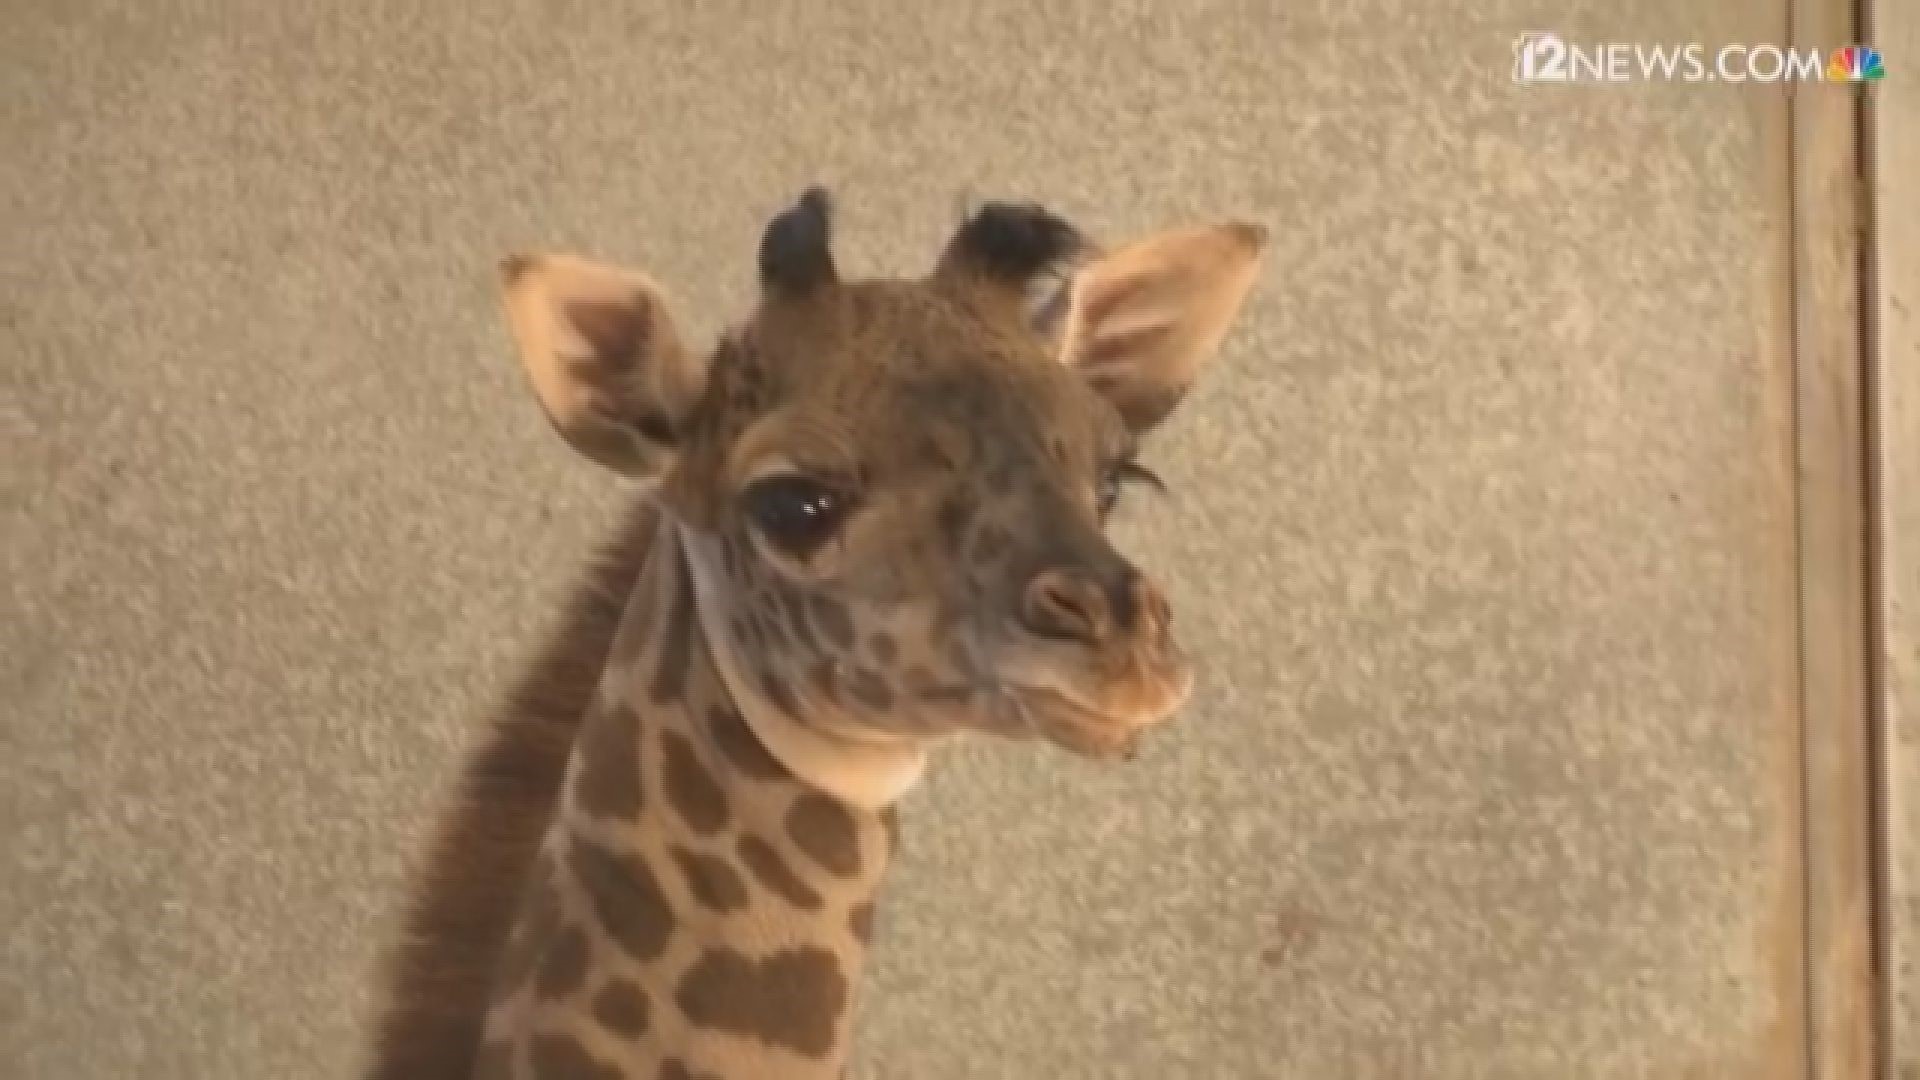 One of Phoenix Zoo's female giraffes, Sunshine, gave birth to a baby girl in March. The new calf was introduced to the media today. Check out the cuteness!